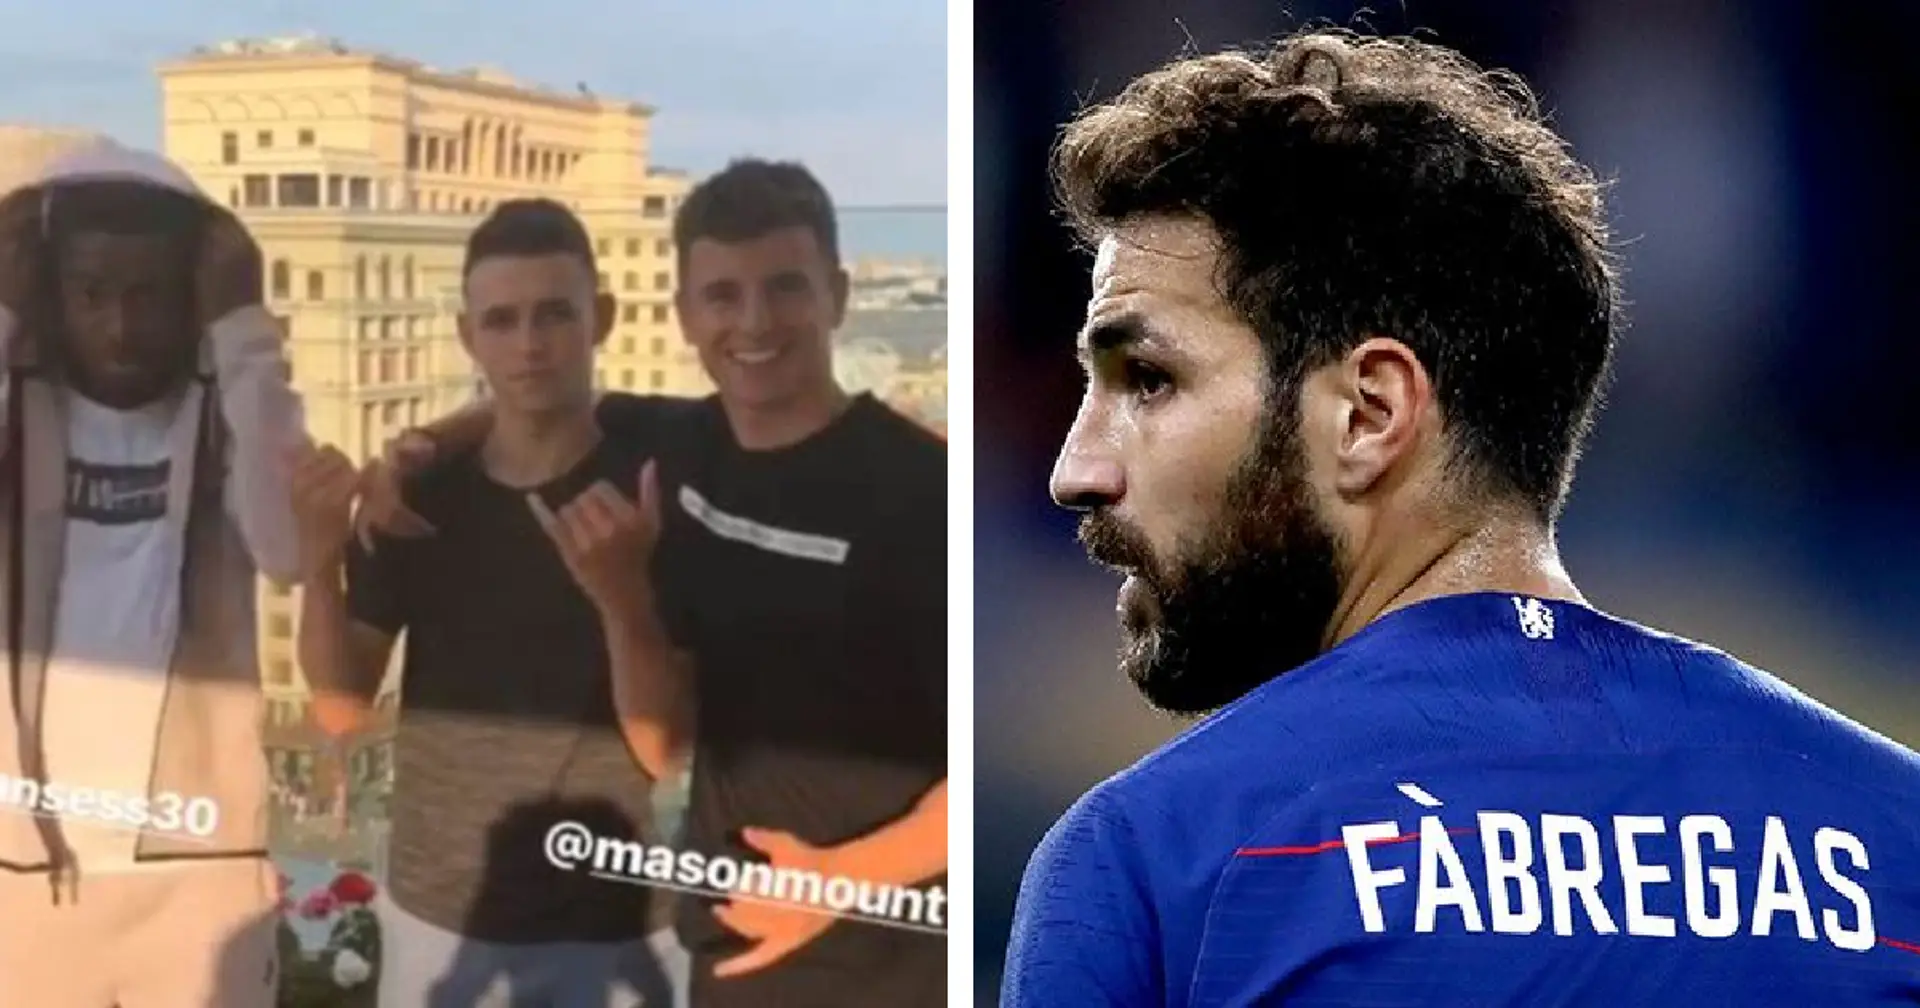 Mason Mount opens up on meeting 'absolute legend' Fabregas at 2018 World Cup as youngster